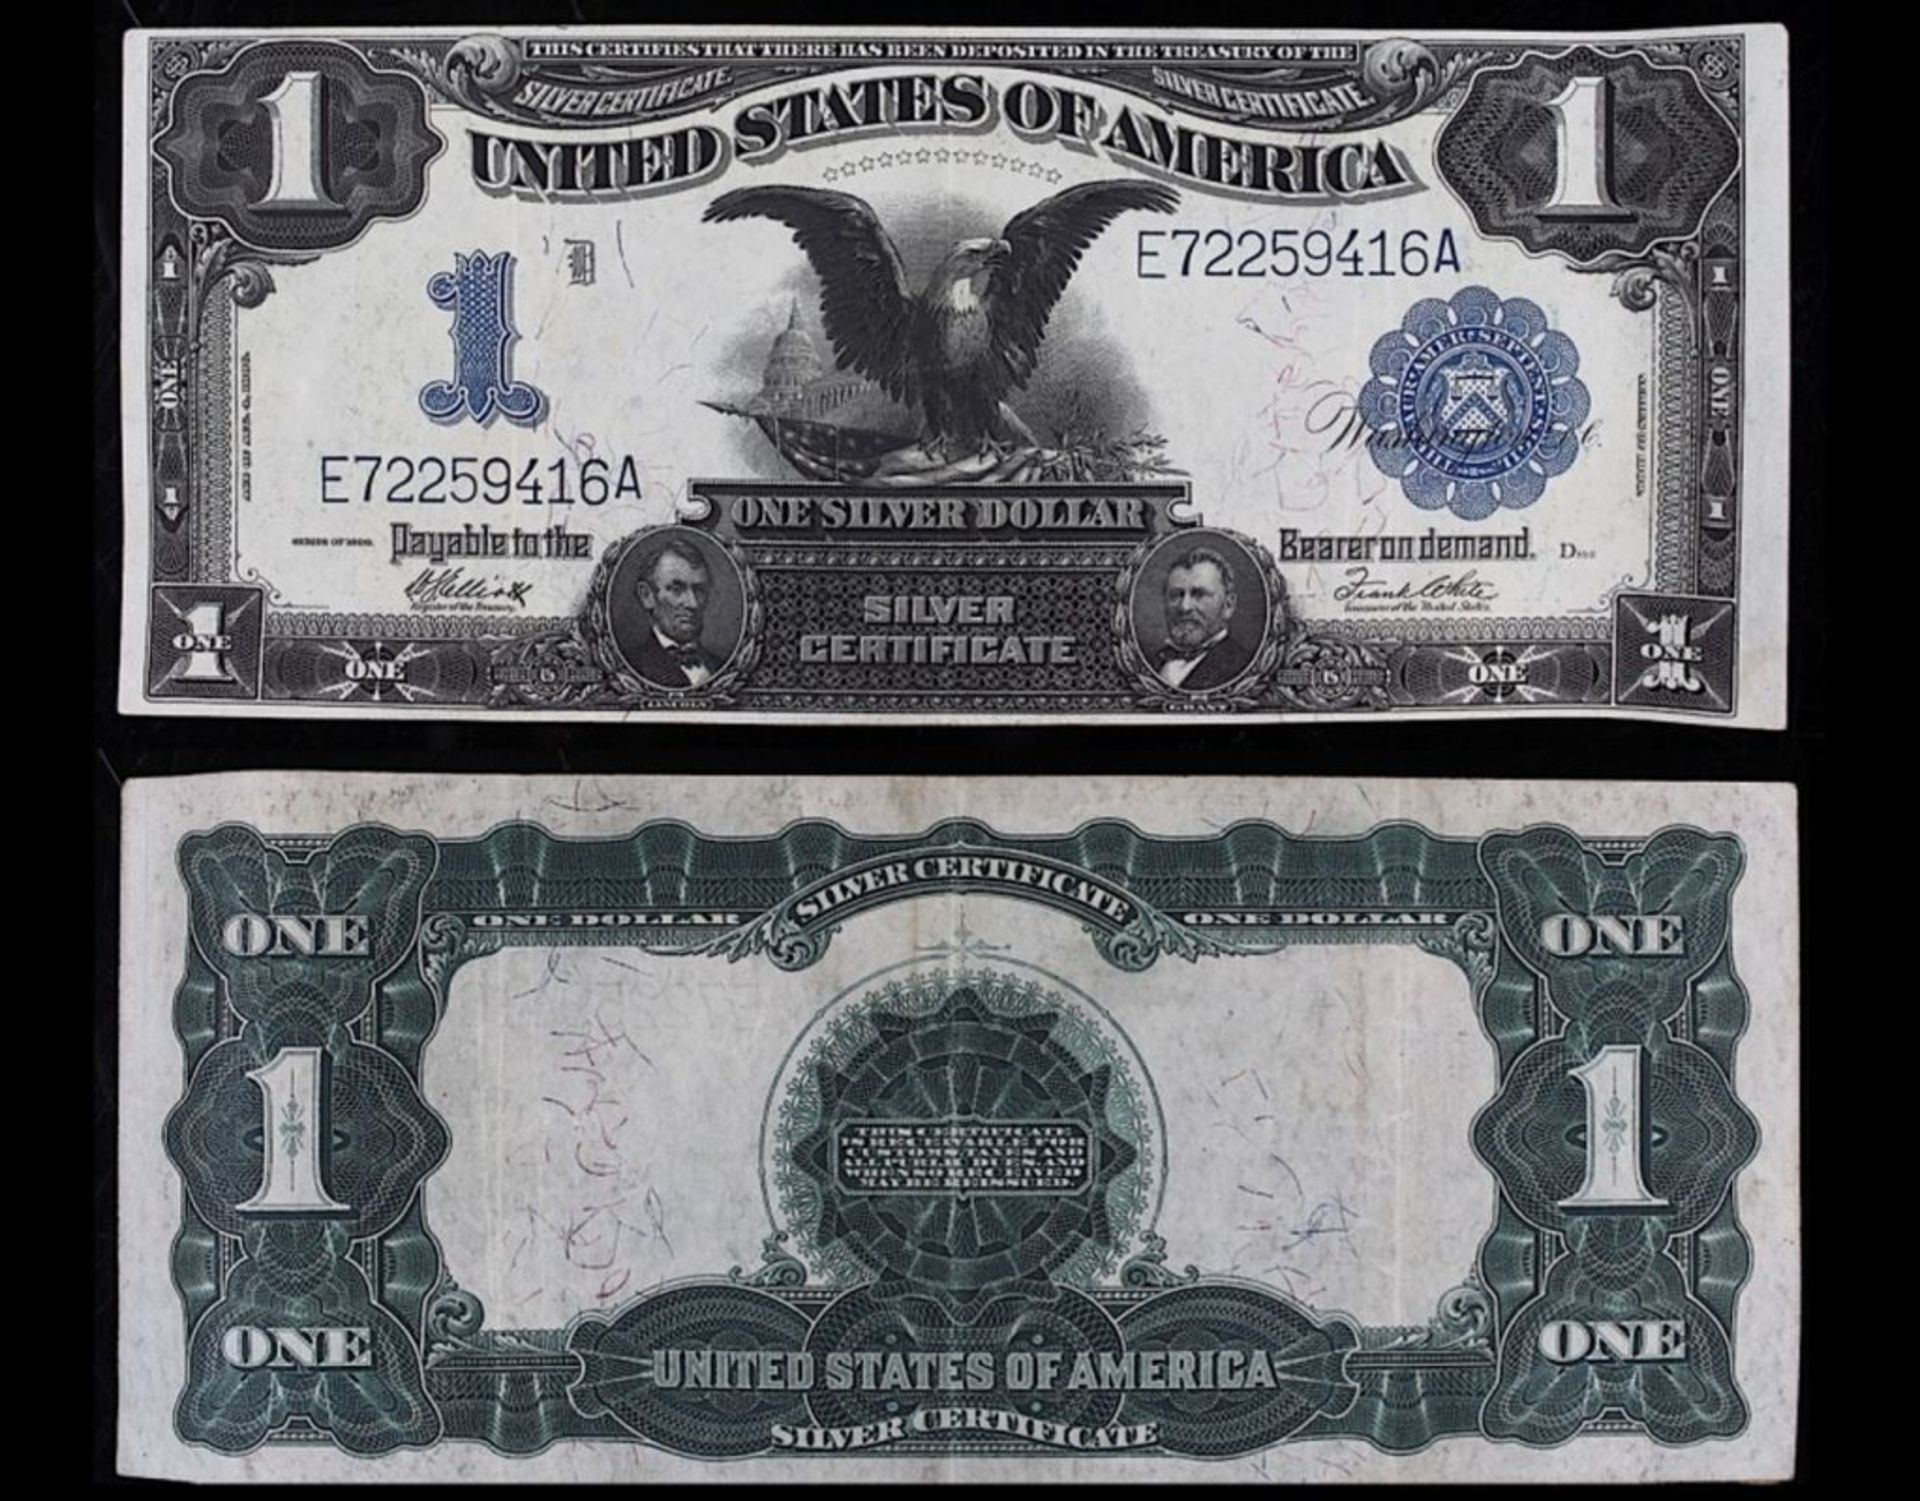 Banknote - United States of America